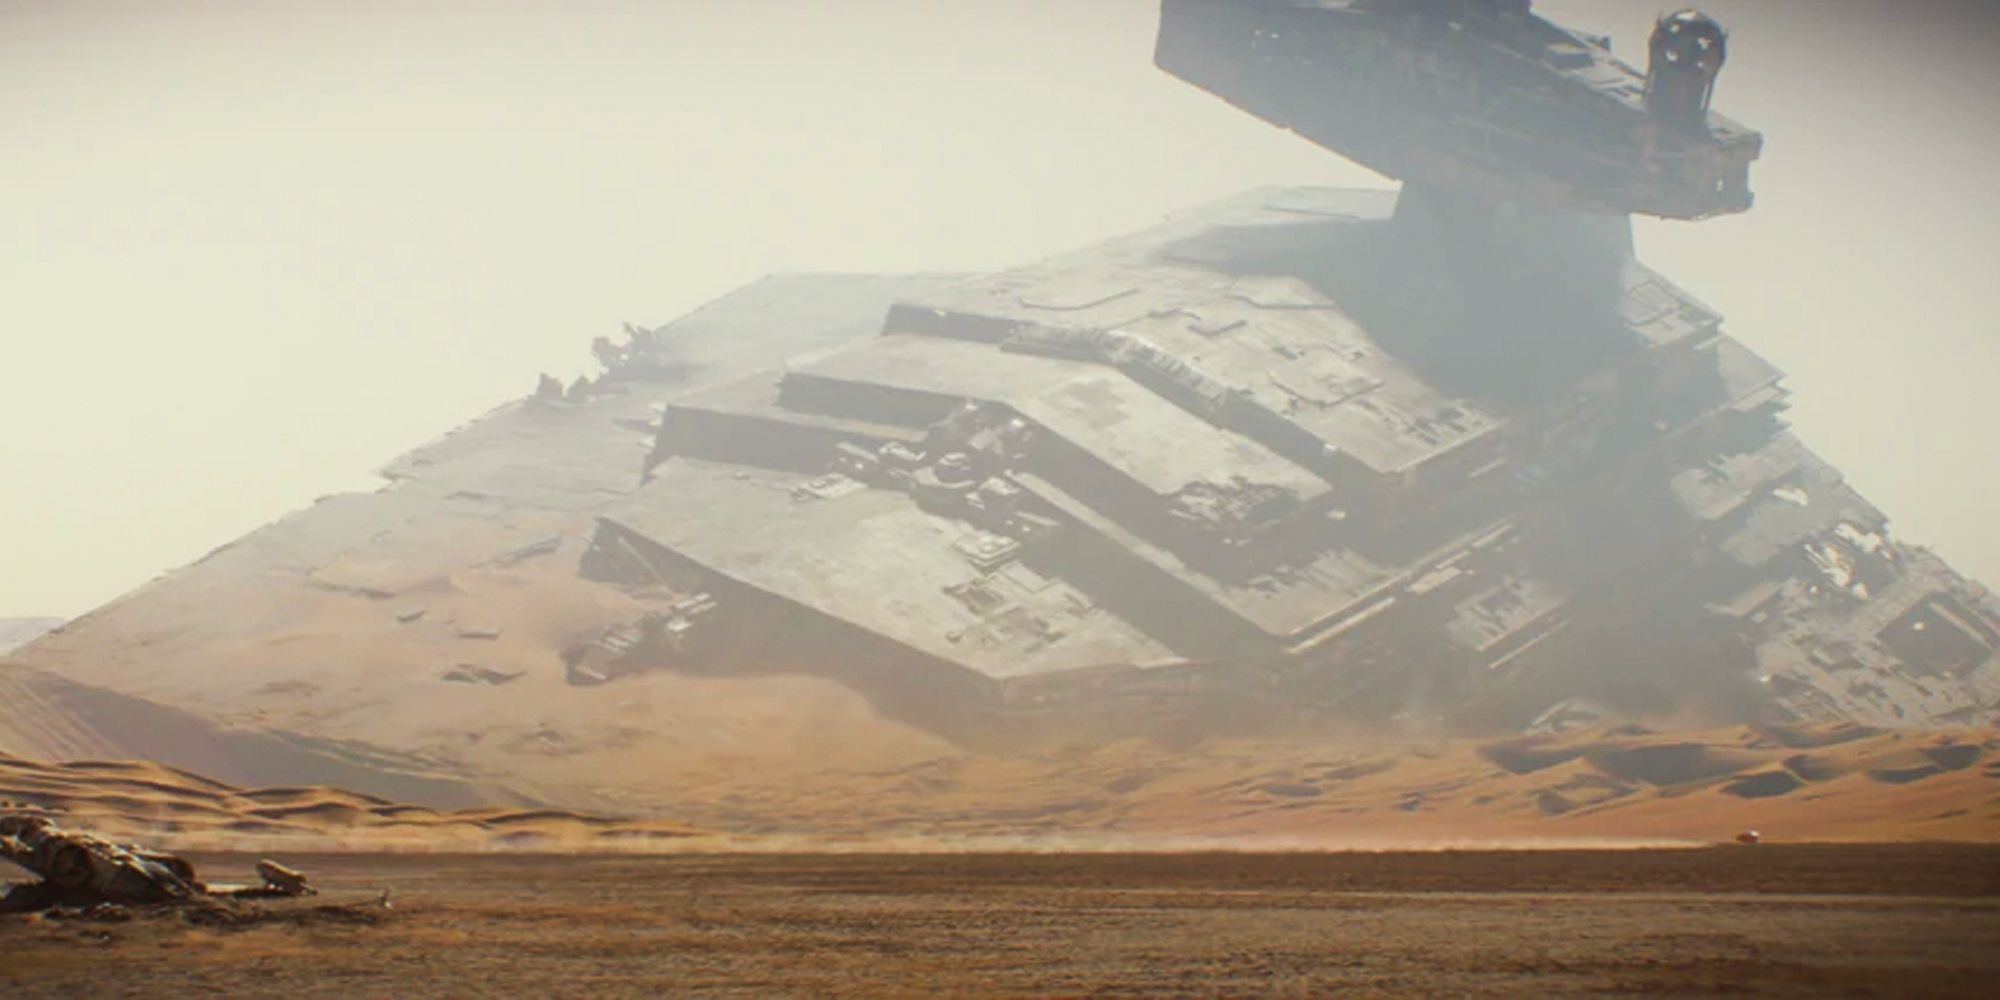 The Jakku Star Destroyer Inflictor crashed into the planet and stuck in the sand